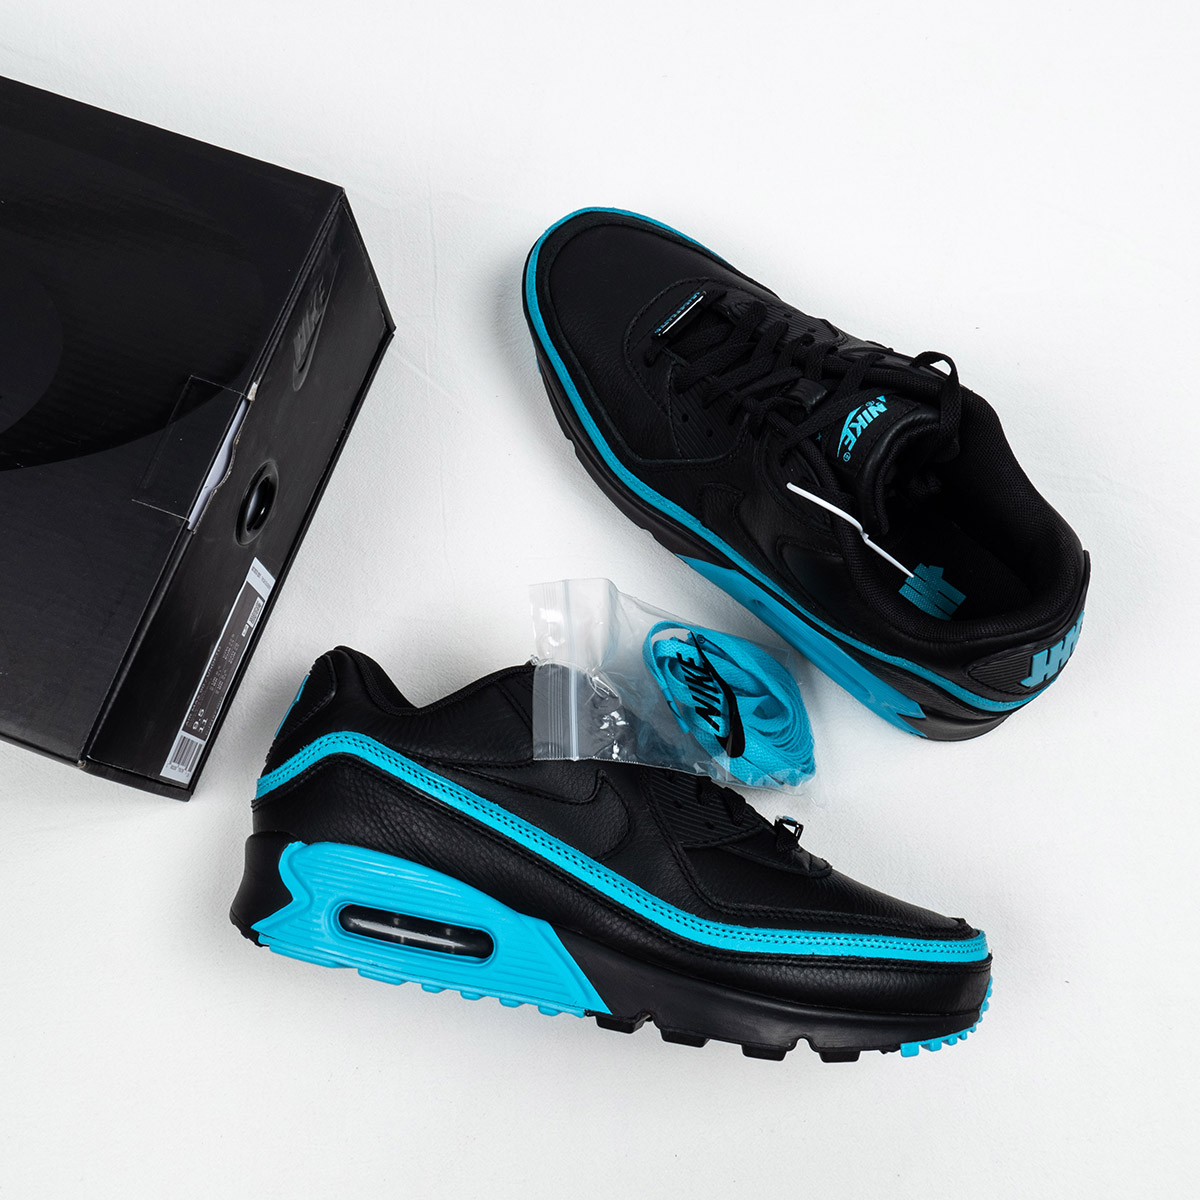 Undefeated x Nike Air Max 90 Black/Blue Fury Shoes